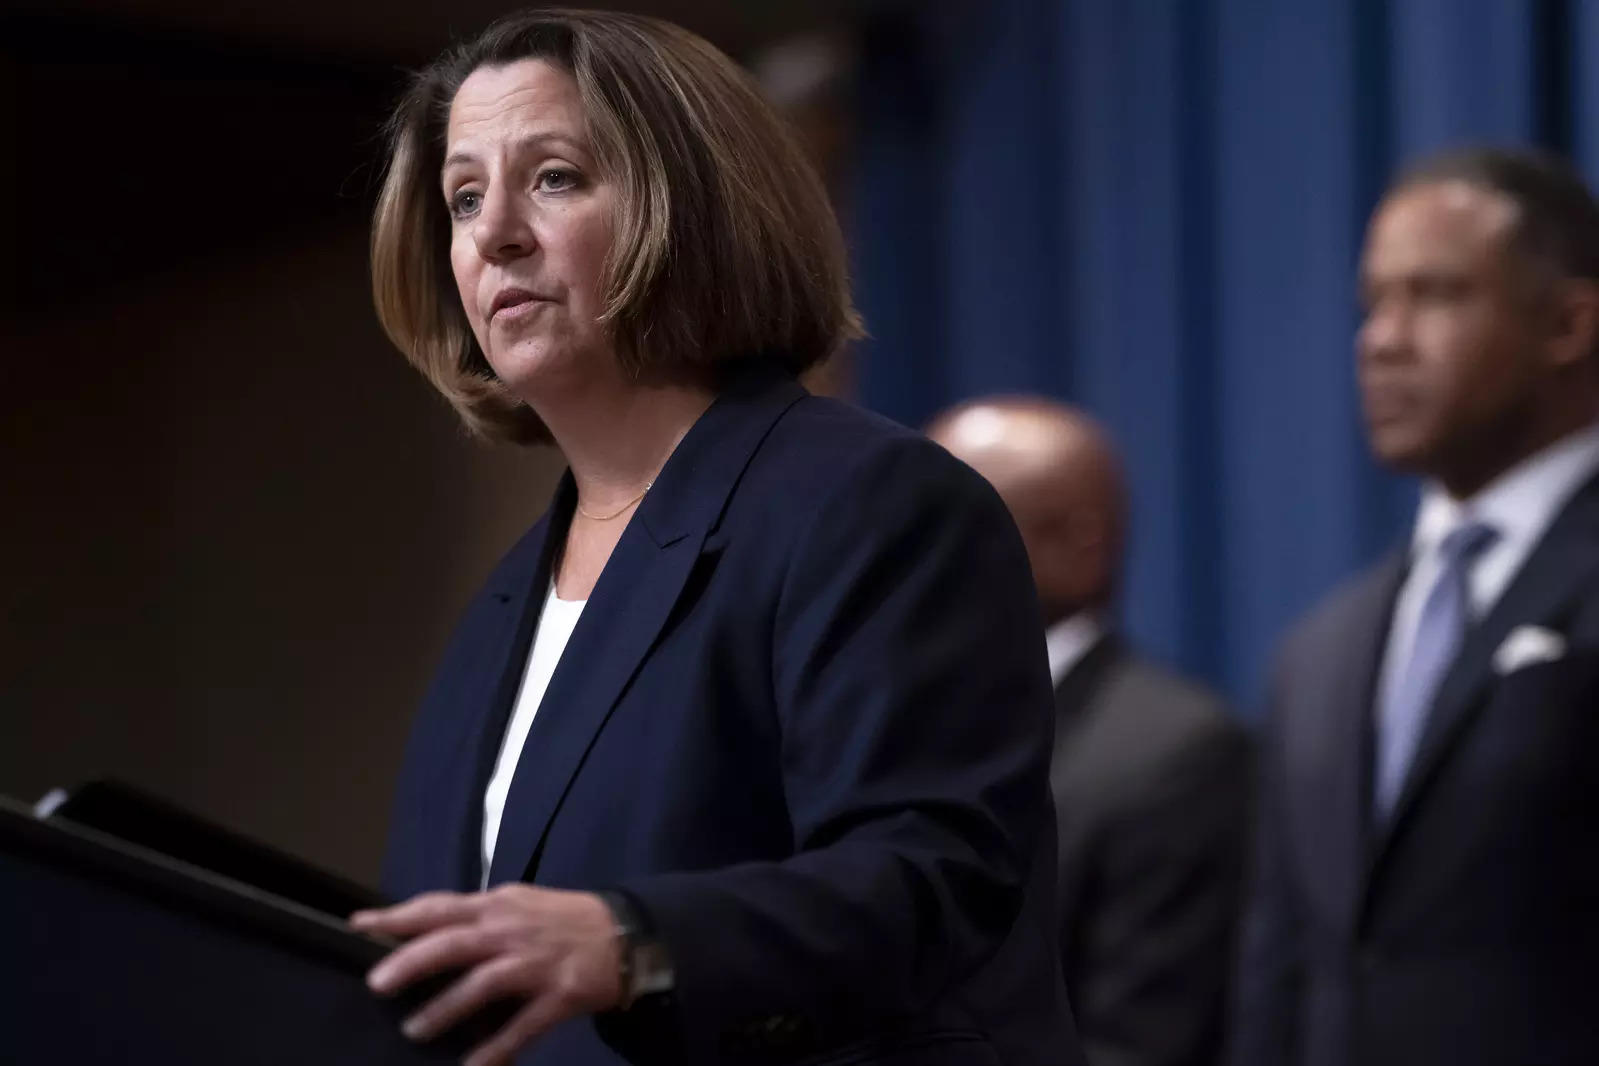 Deputy Attorney General Lisa Monaco announces international enforcement action against cryptocurrency exchange Bitzlato and the arrest of the company's founder, Russian national Anatoly Legkodymov.